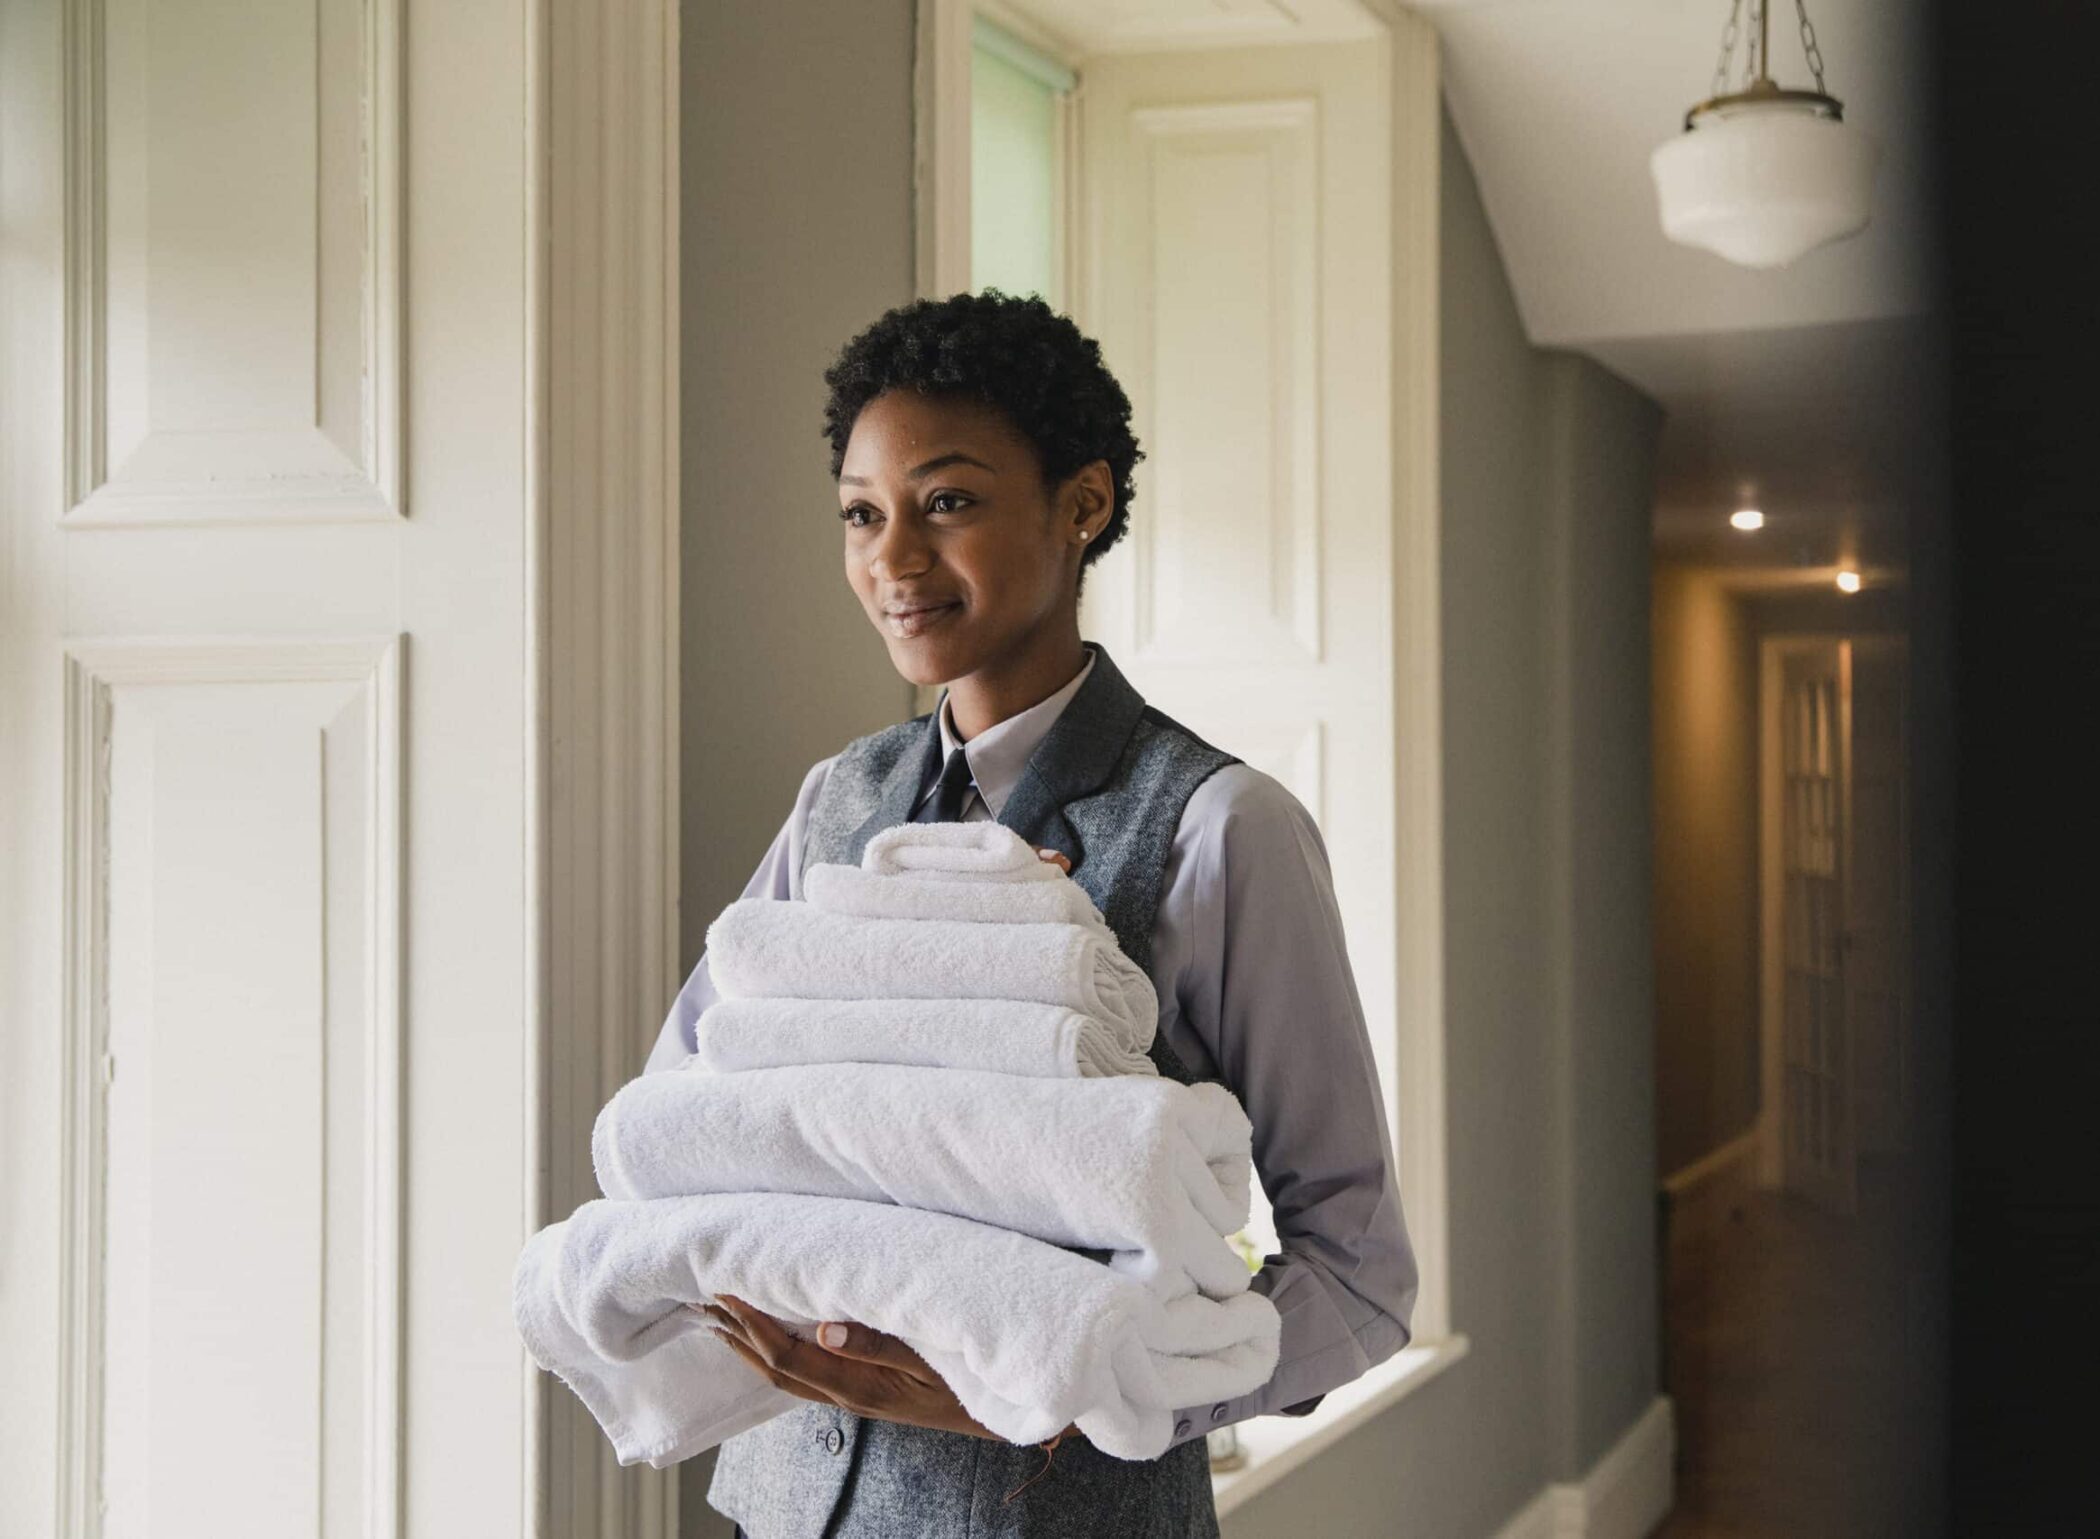 Housekeeper with Cotton Towels